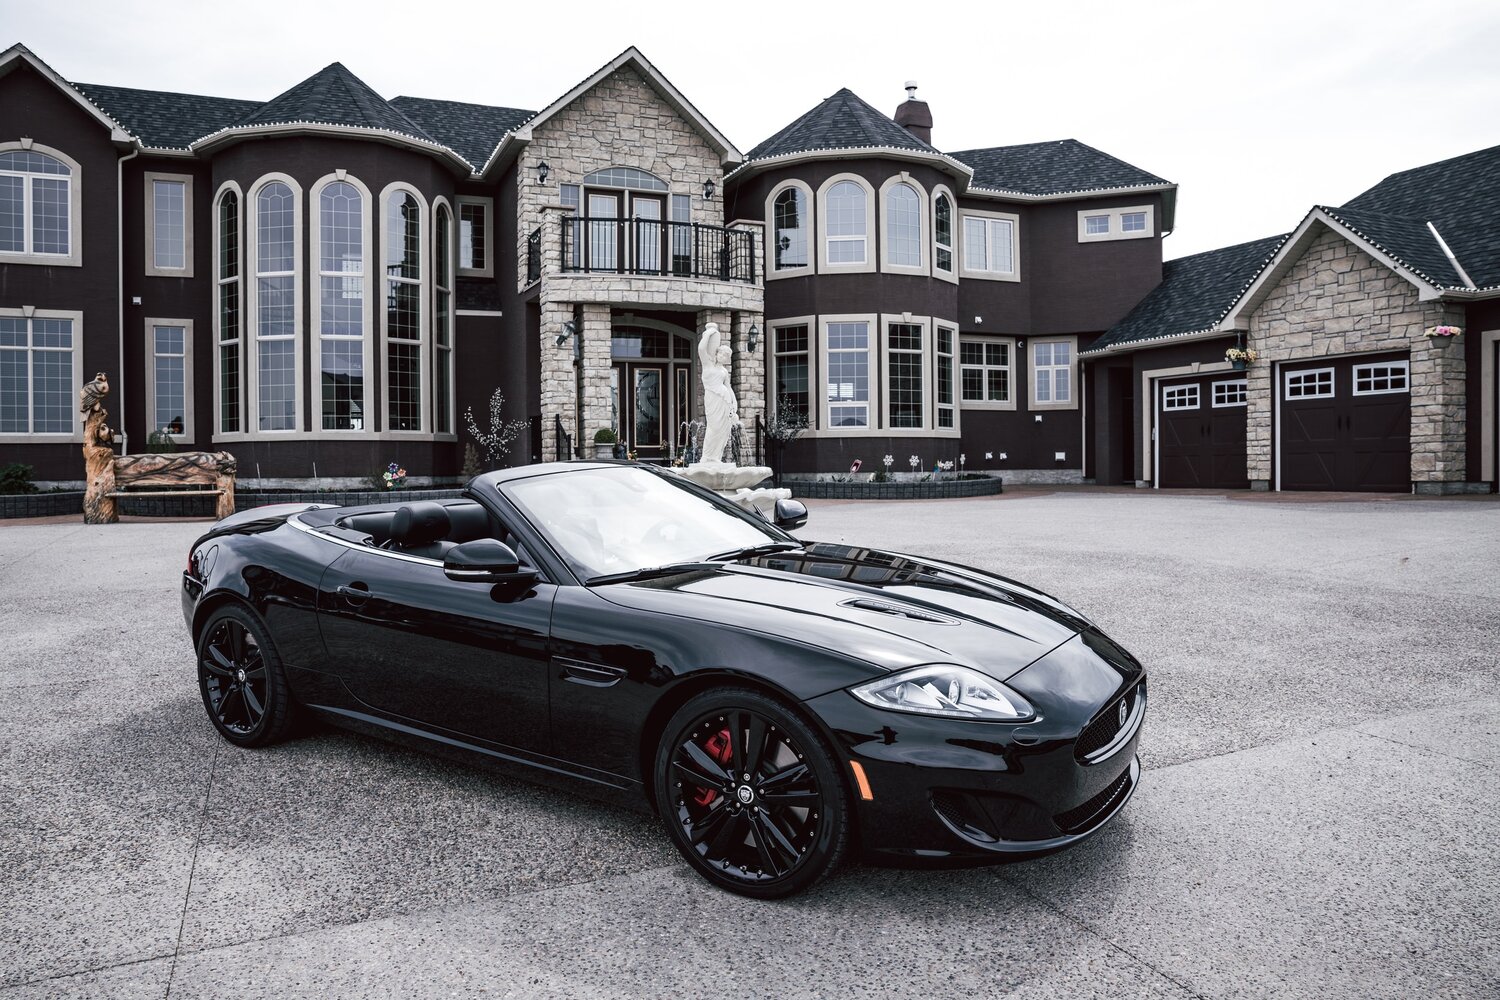 Black luxury car parked in front of a mansion.